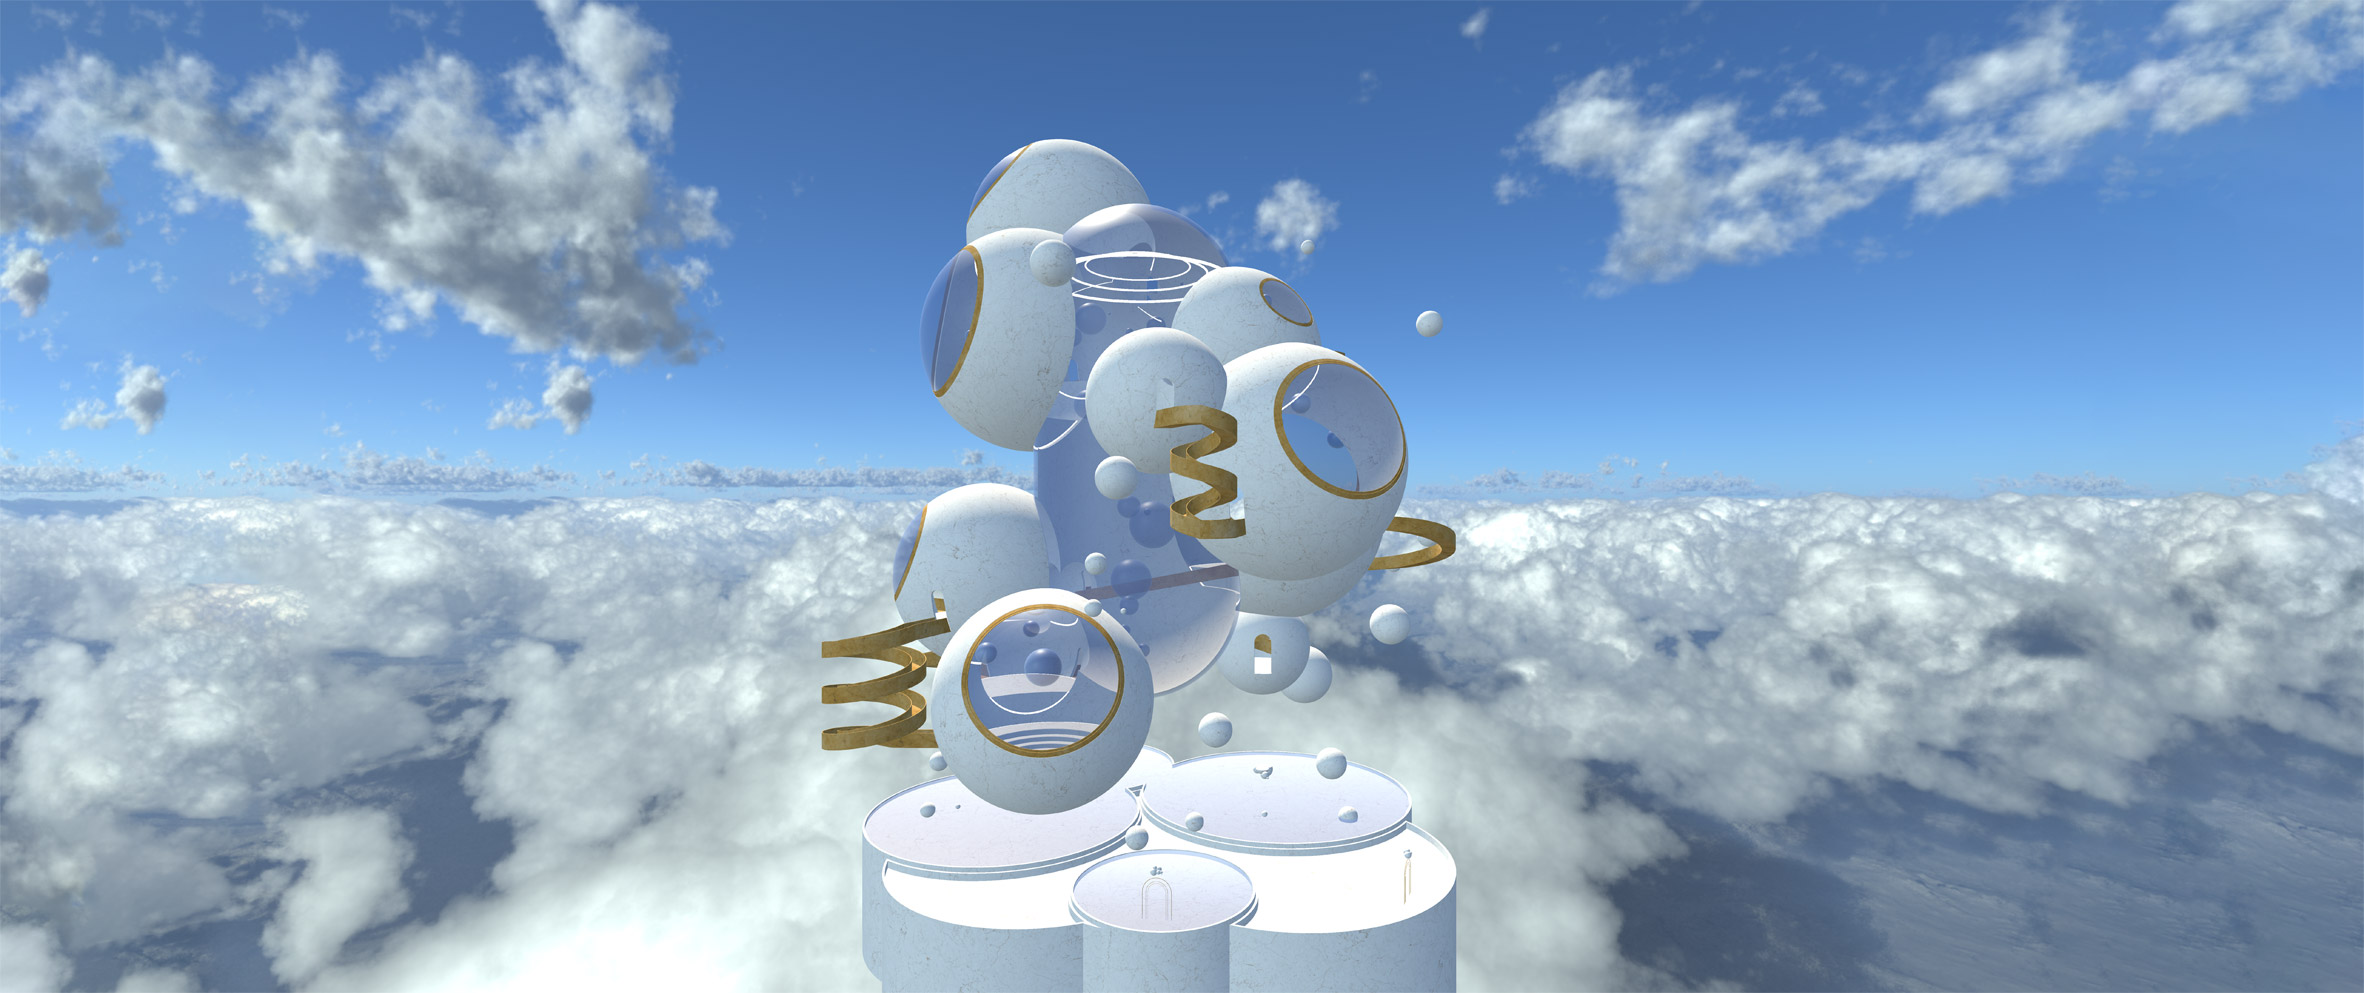 A visualisation of an abstract structure within the clouds